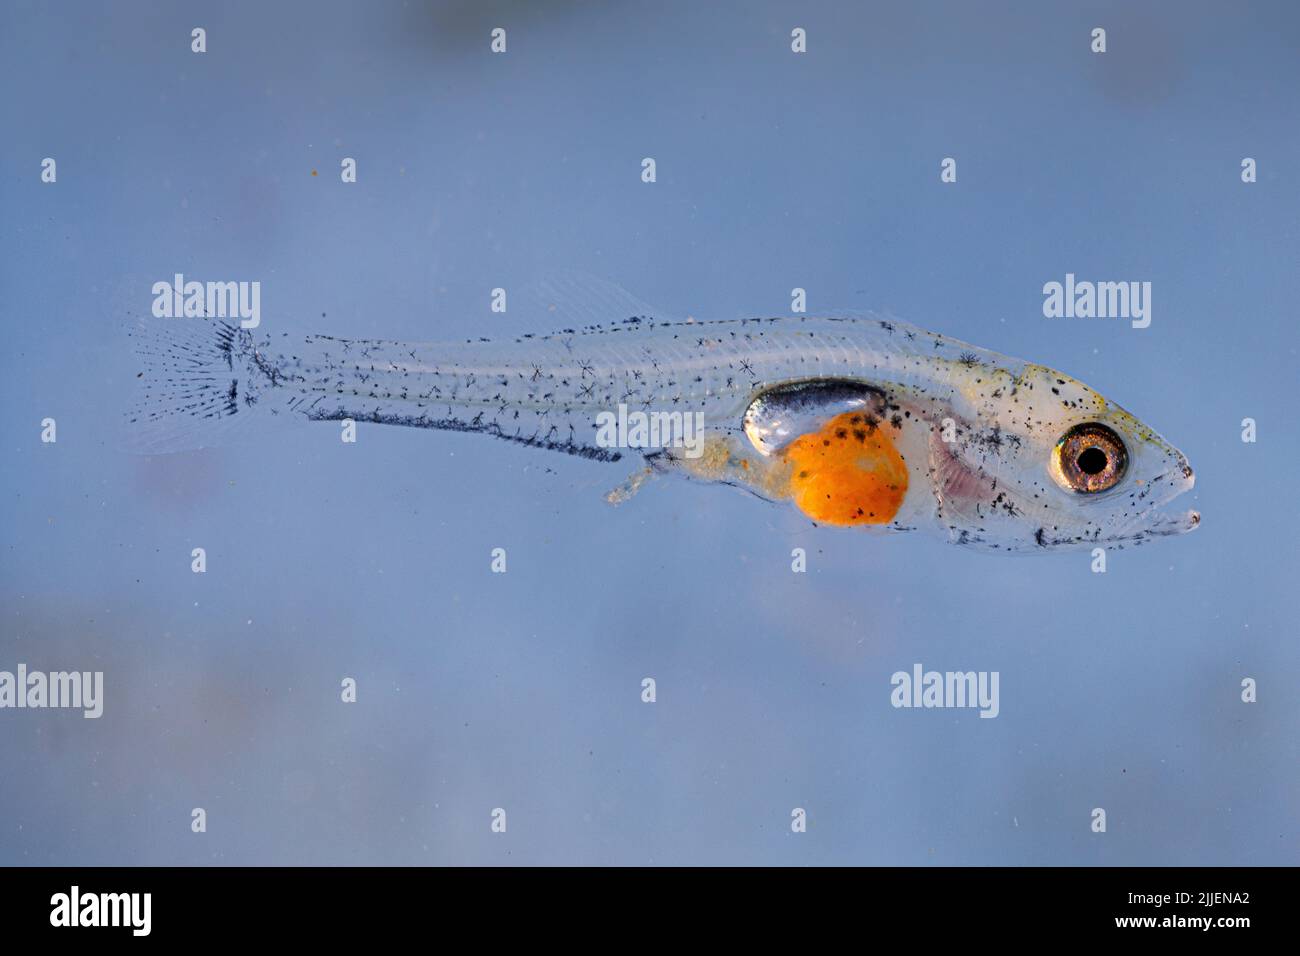 pike-perch, zander (Stizostedion lucioperca, Sander lucioperca), juvenile four weeks after egg deposition at water temperature of 21 degree Celsius , Stock Photo